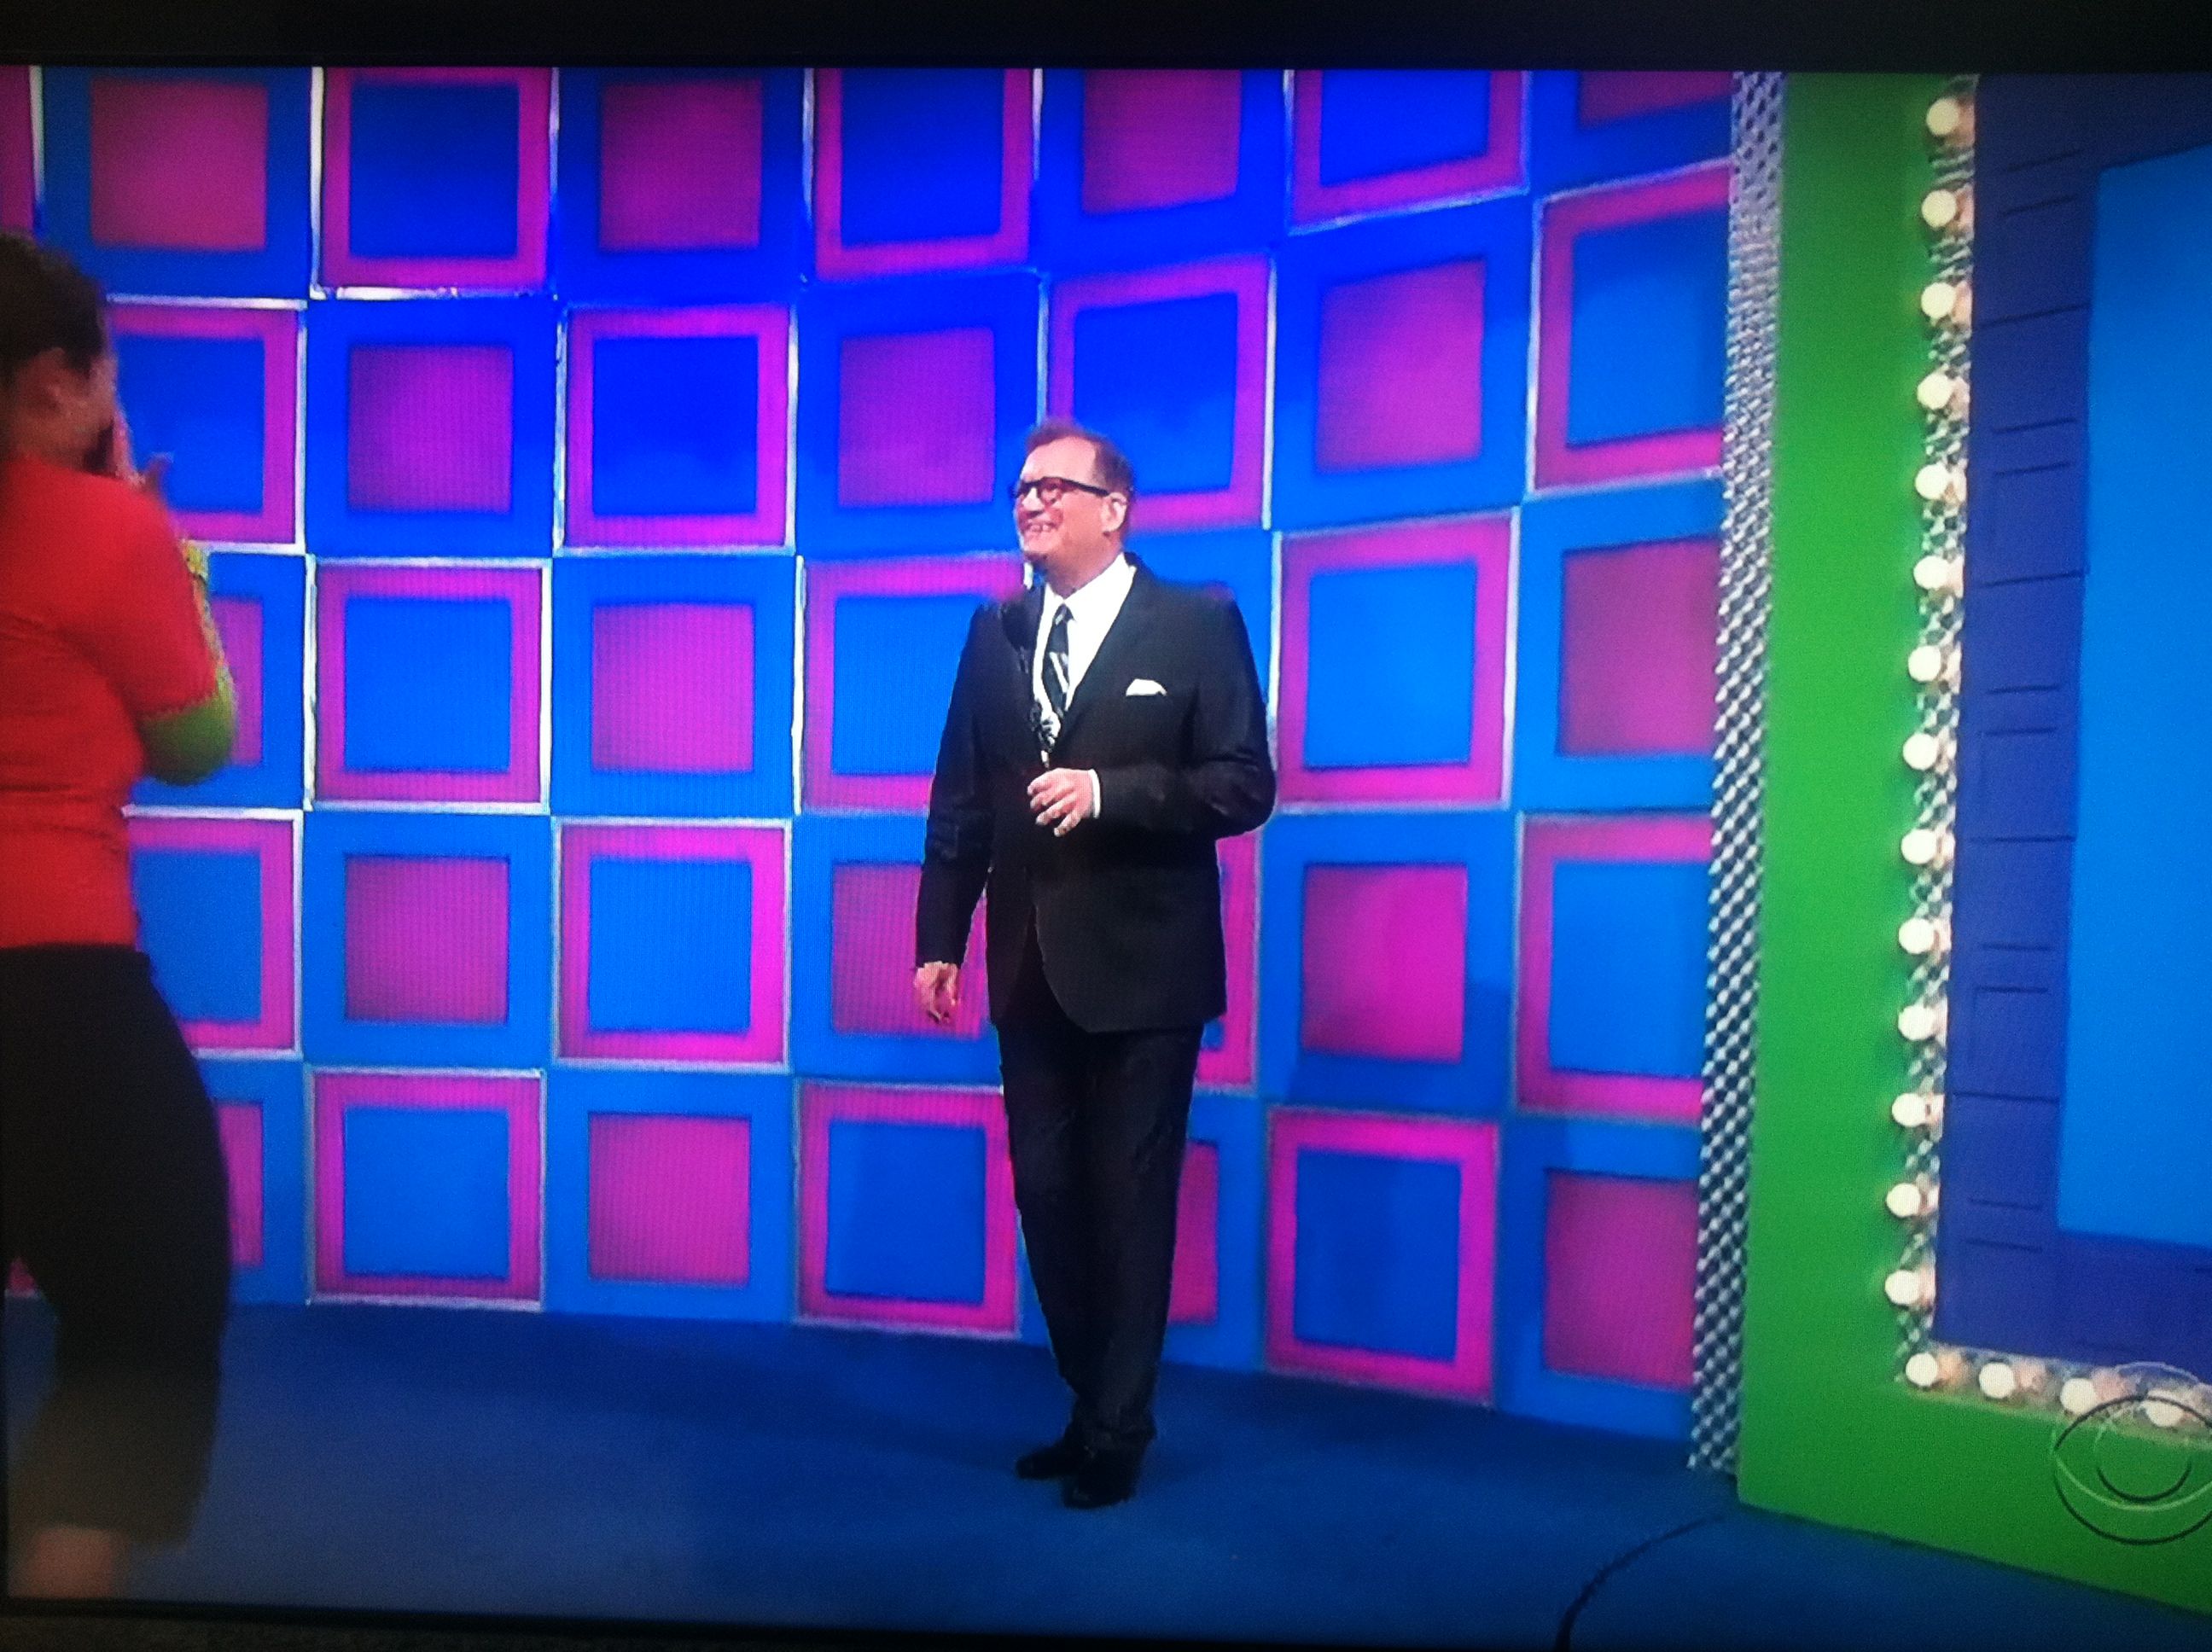 Aurora De Lucia being welcomed to The Price is Right stage by Drew Carey